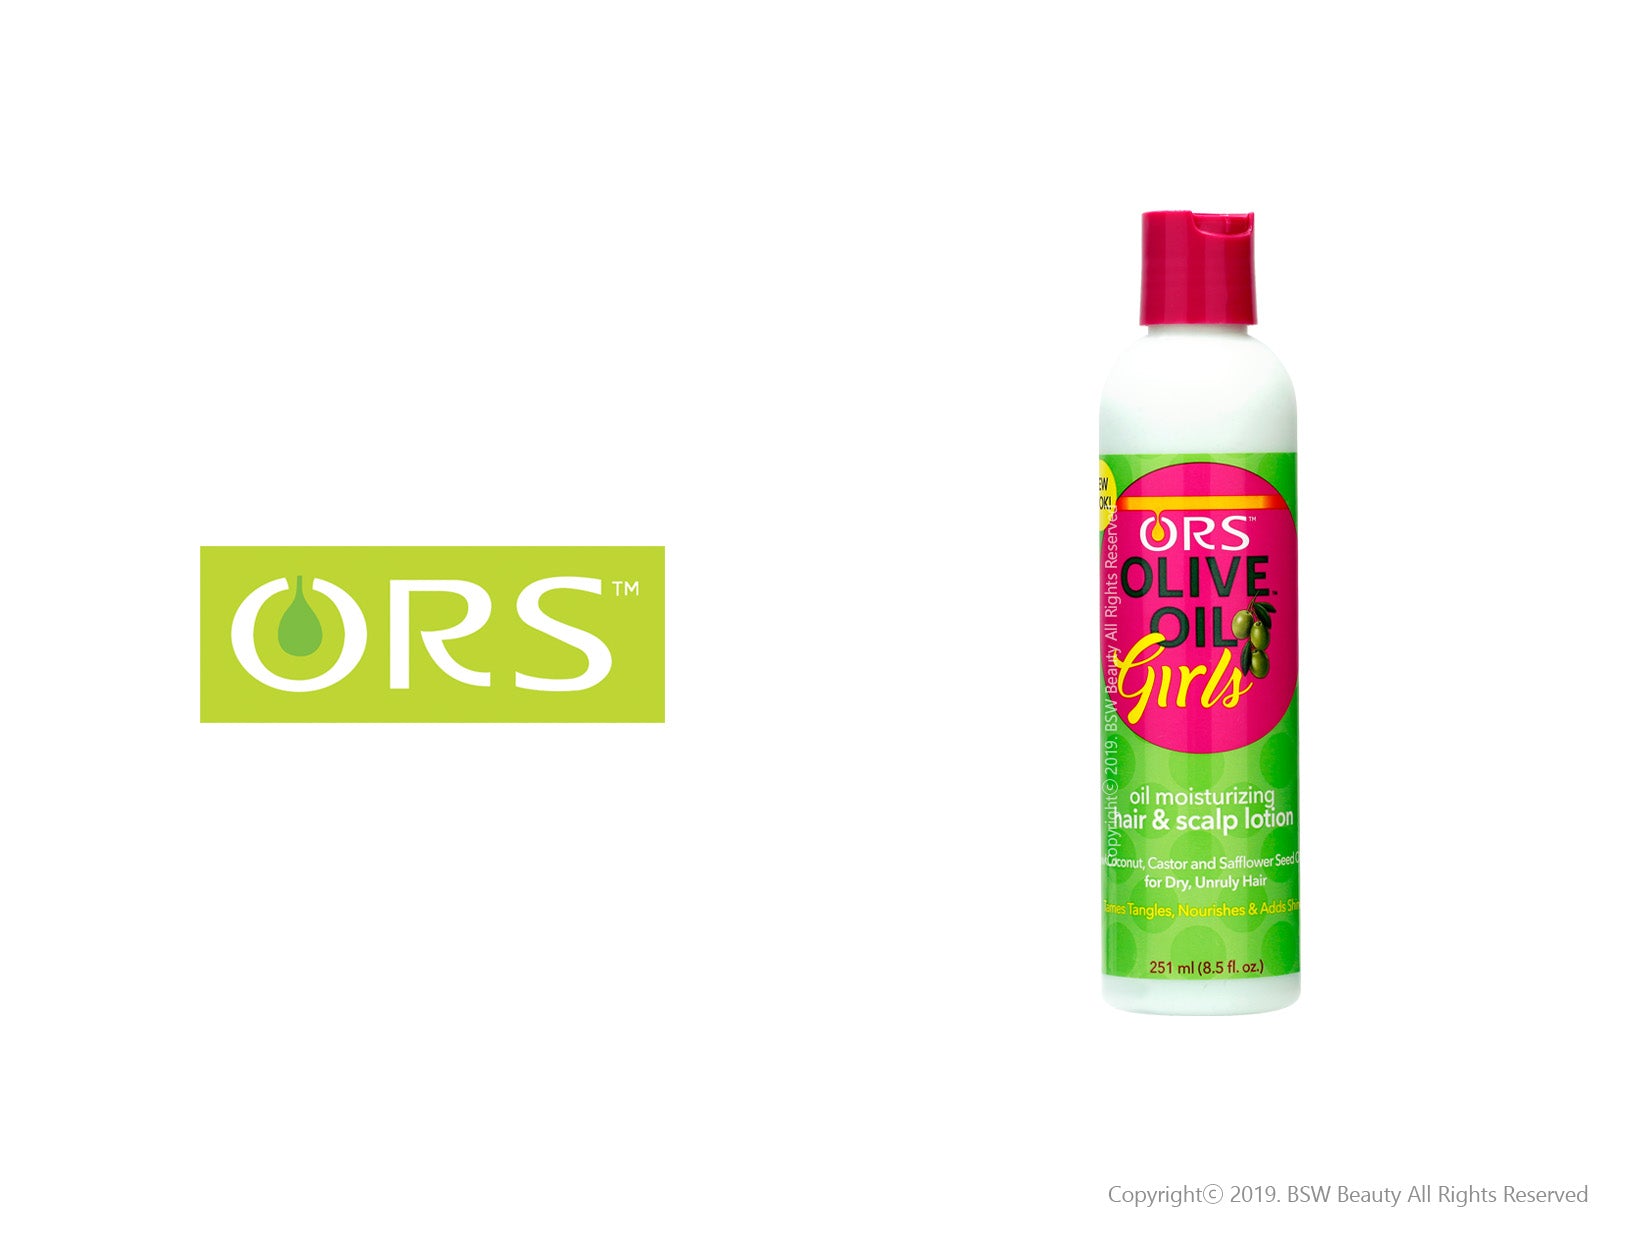 ORS OLIVE OIL GIRLS OIL MOISTURIZING HAIR AND SCALP LOTION 8.5oz